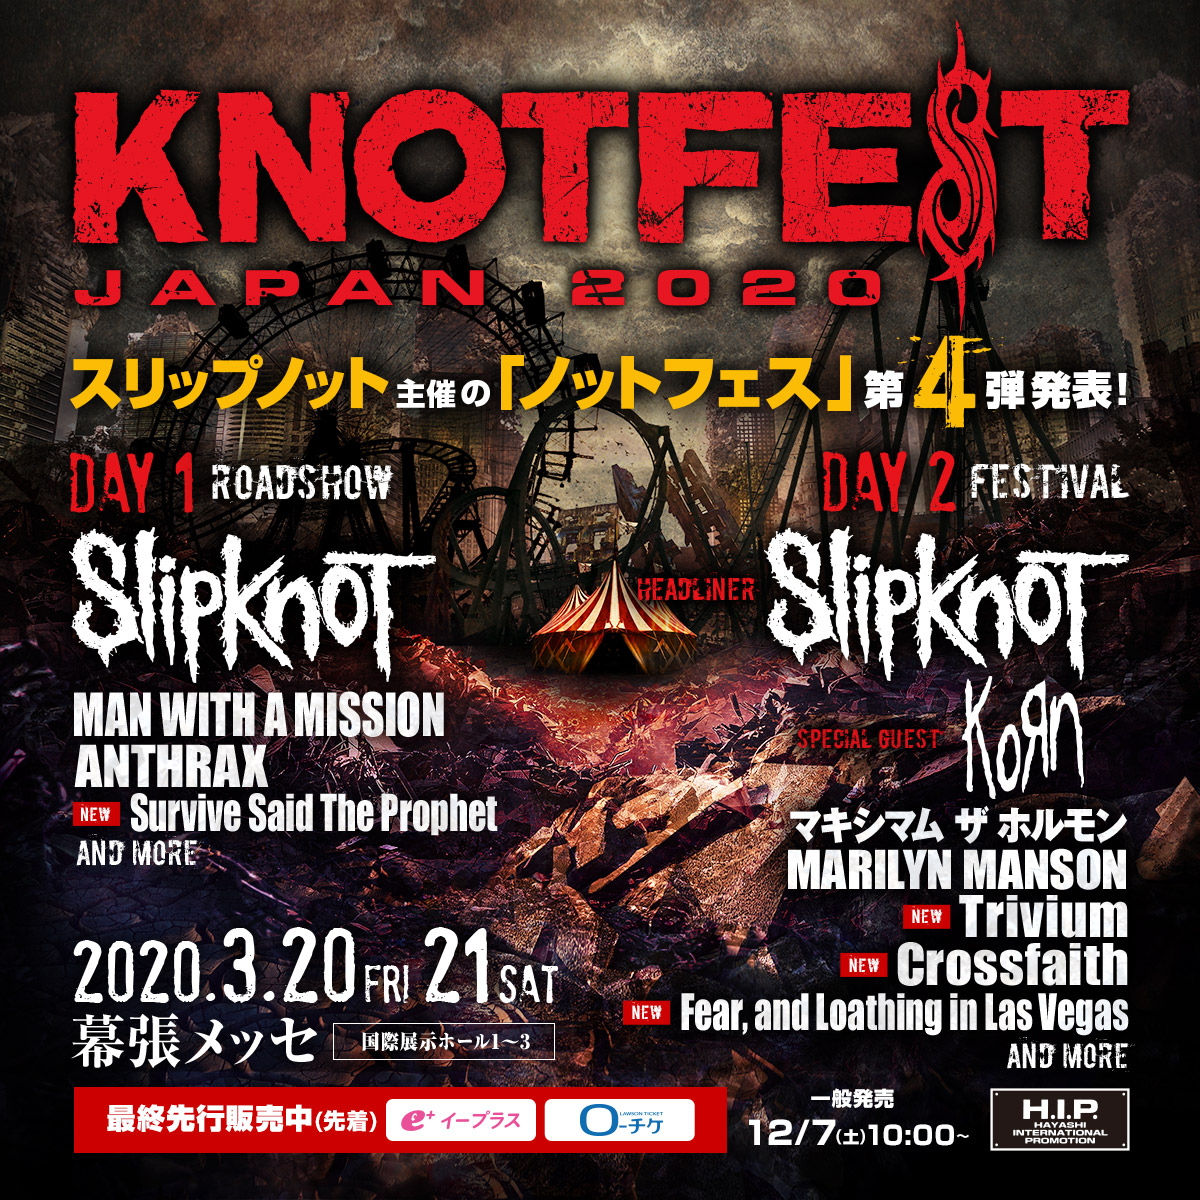 KNOTFEST TO MAKE HISTORY ONCE AGAIN WITH THE FIRST EVER KNOTFEST UK